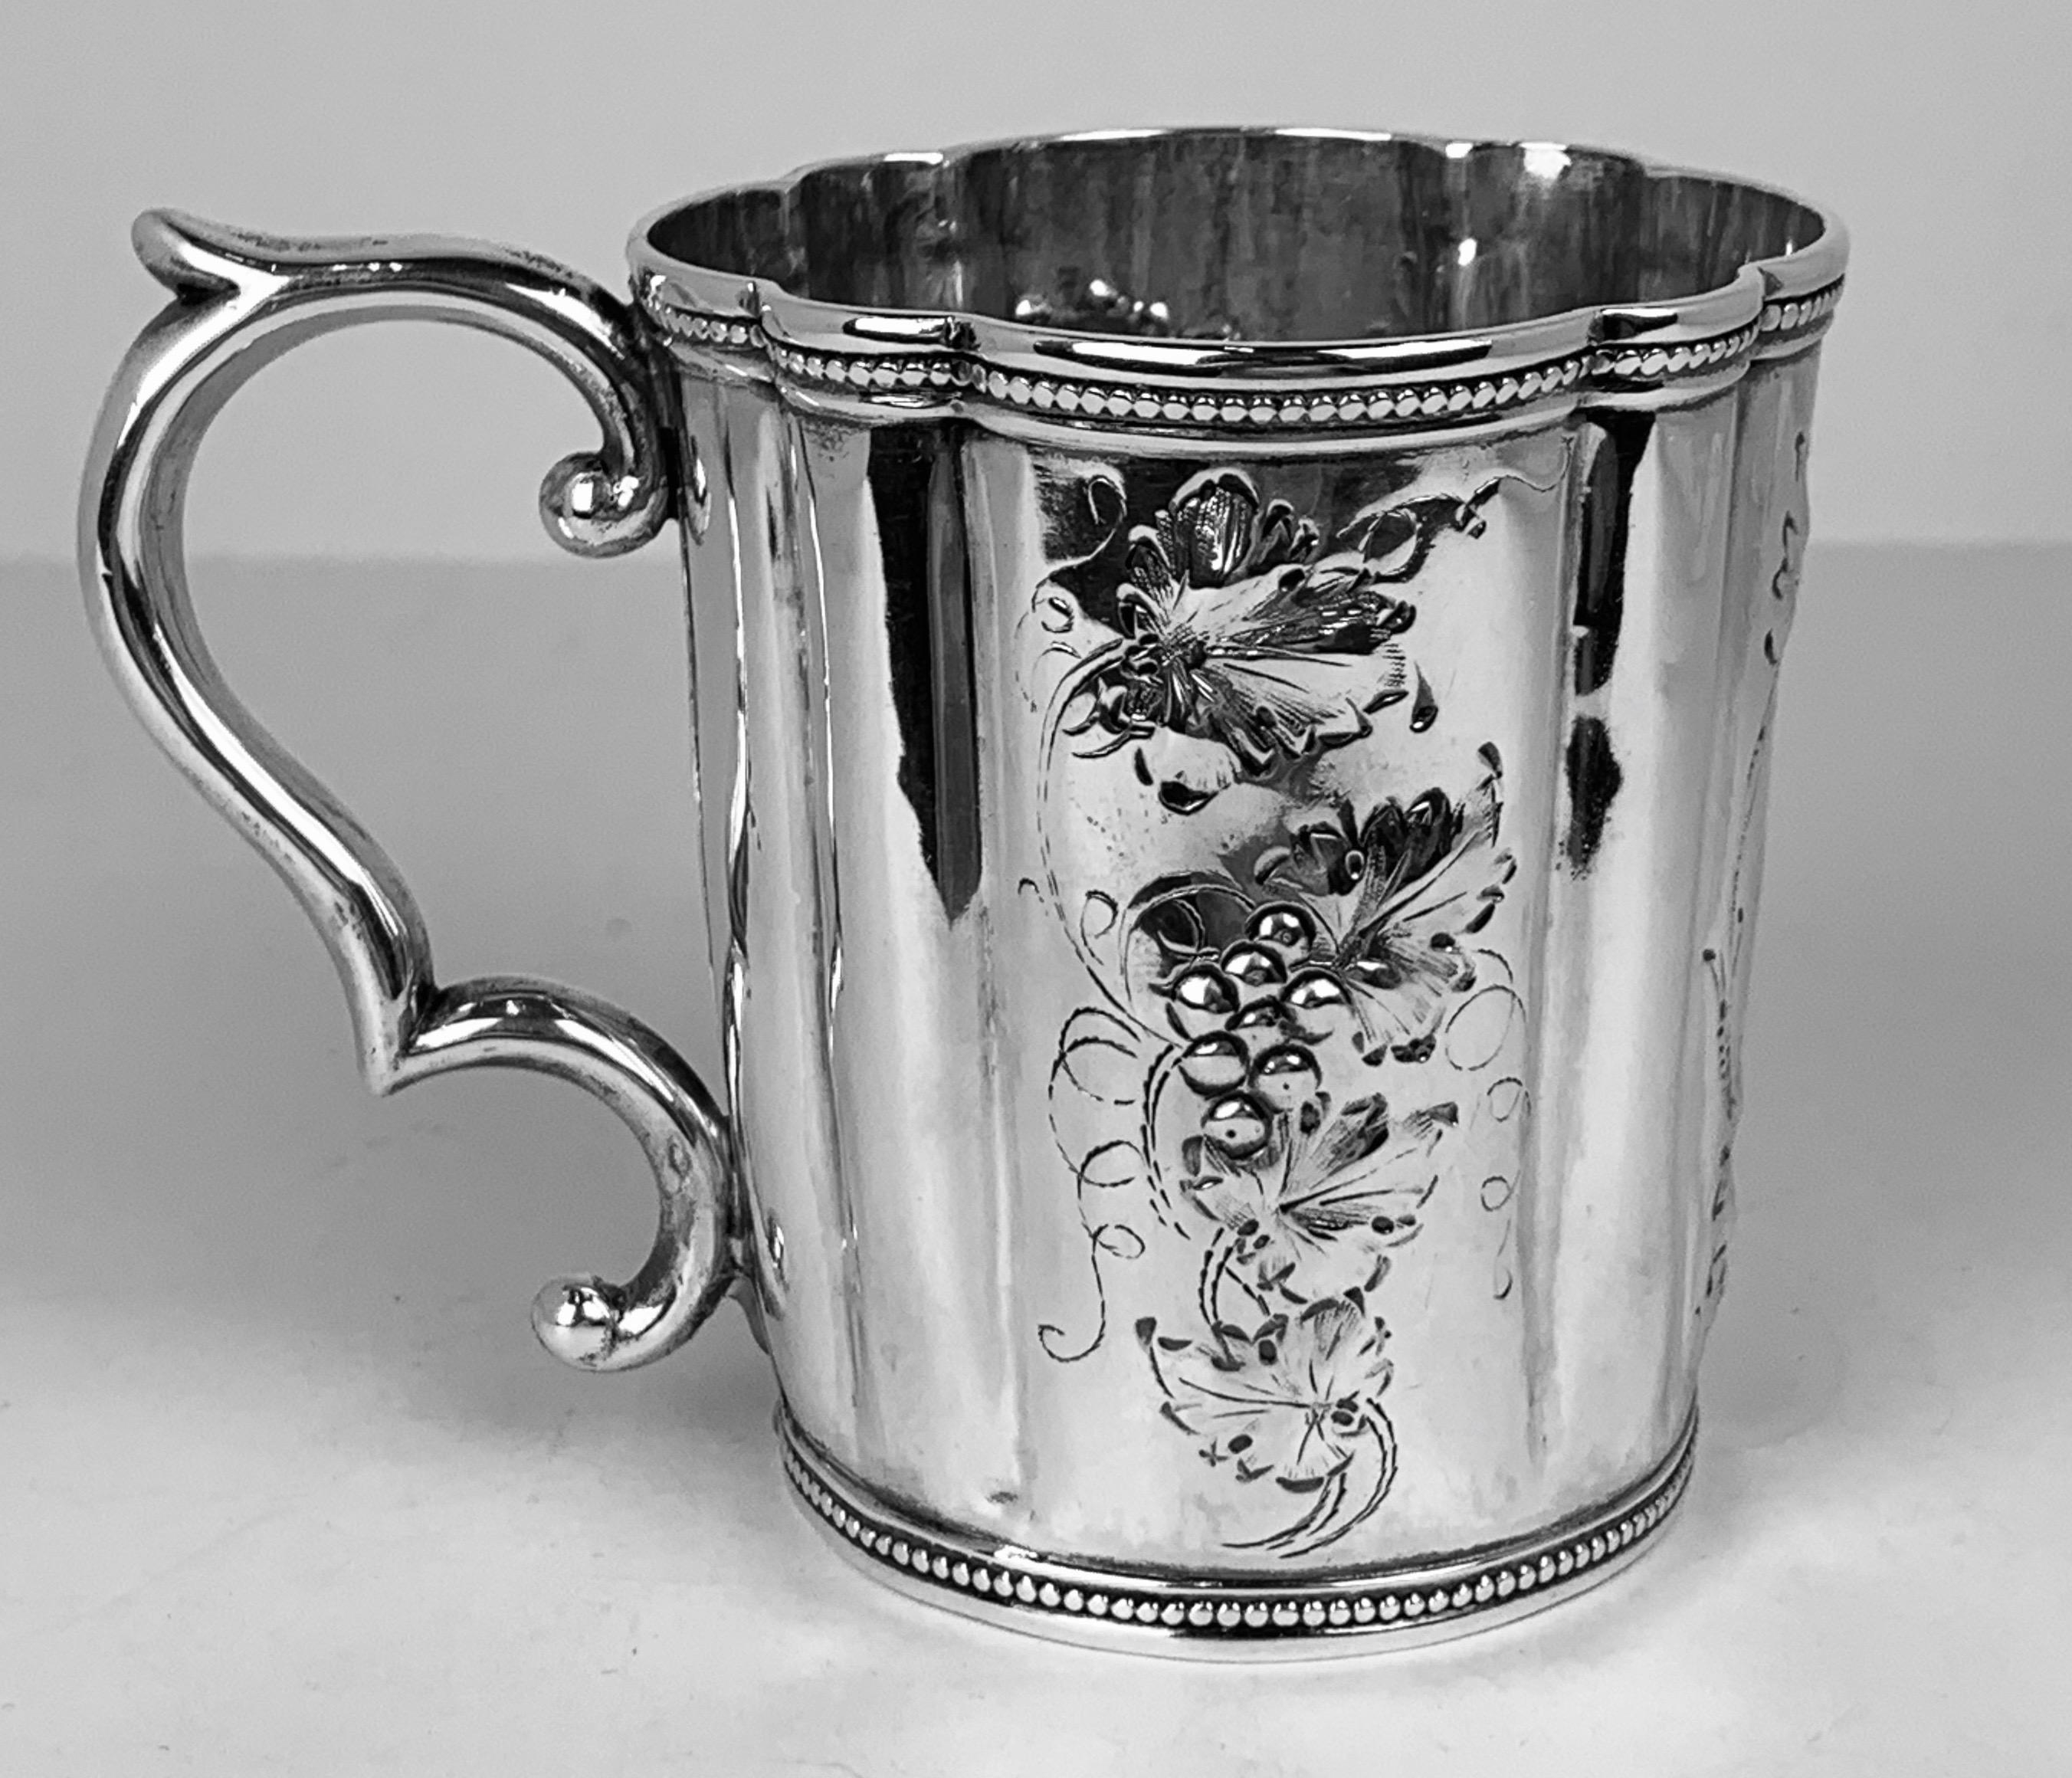 Child's coin silver repoussé cup by Tift & Whiting. Founded in North Attelboro, Massachusetts by Albert C. Tift and William D. Whiting. The company operated in business from circa 1840-1853. They were makers of quality coin silver and used the tag